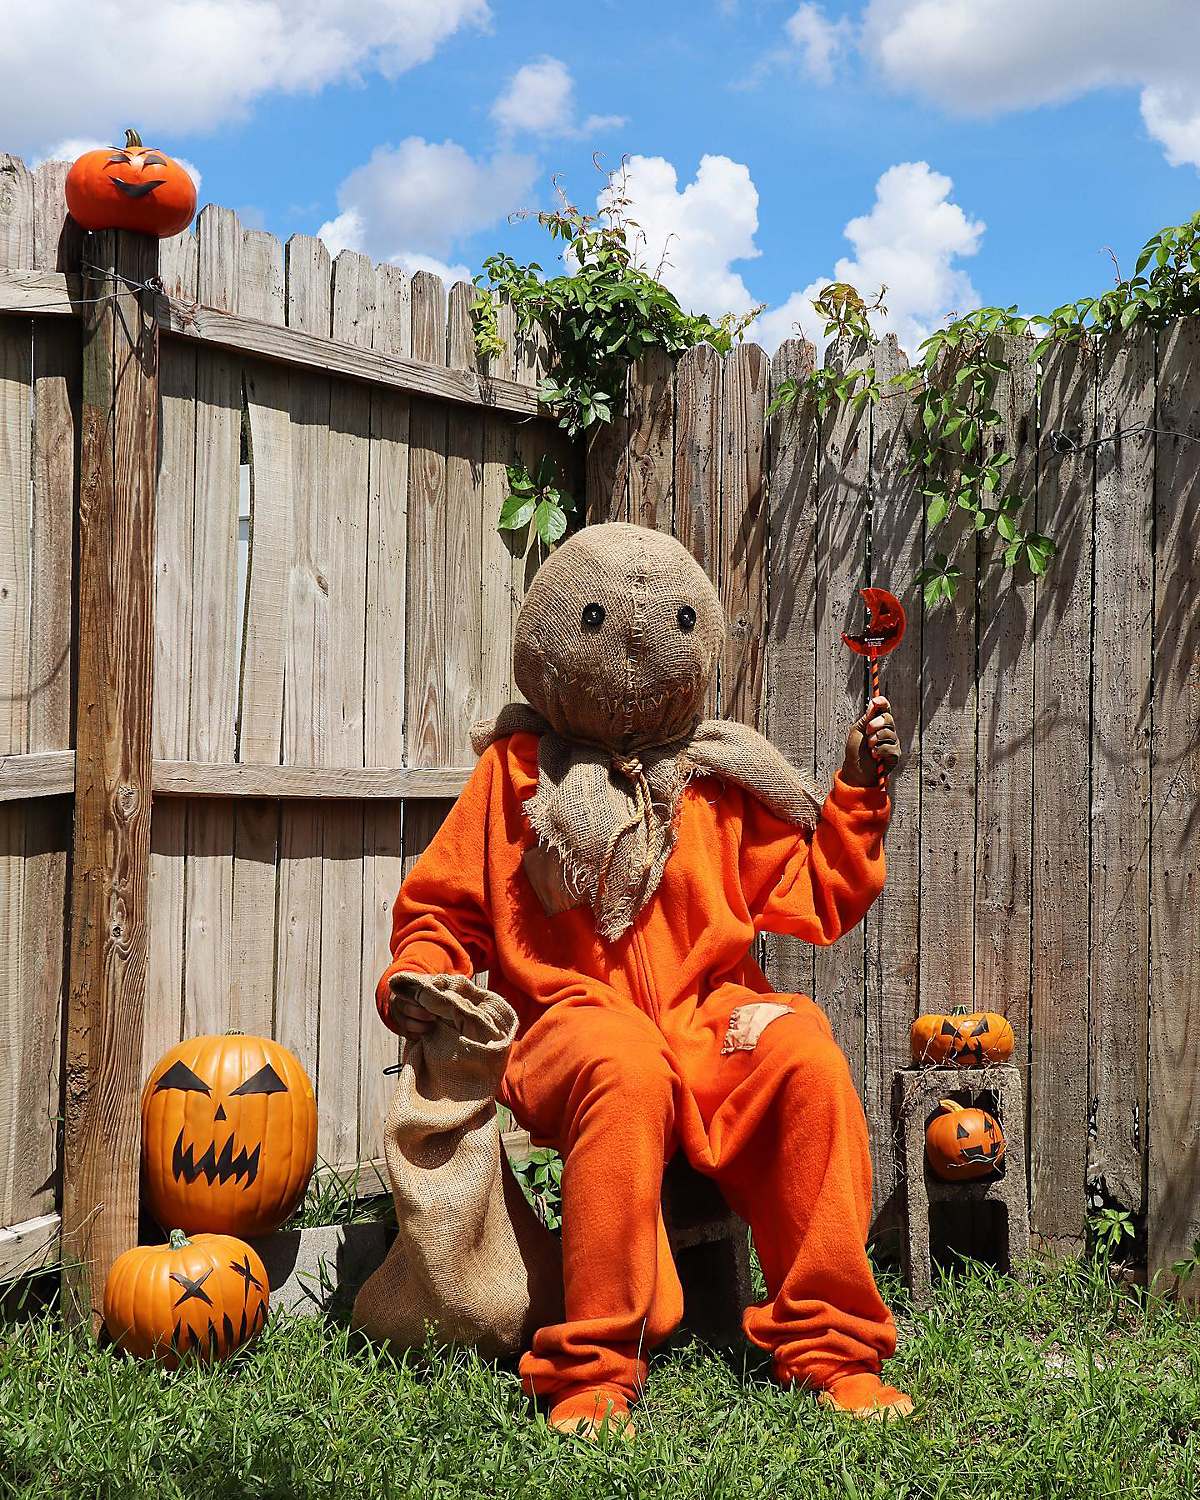 Person dressed as Sam from Trick 'r Treat holding lollipop and burlap sack